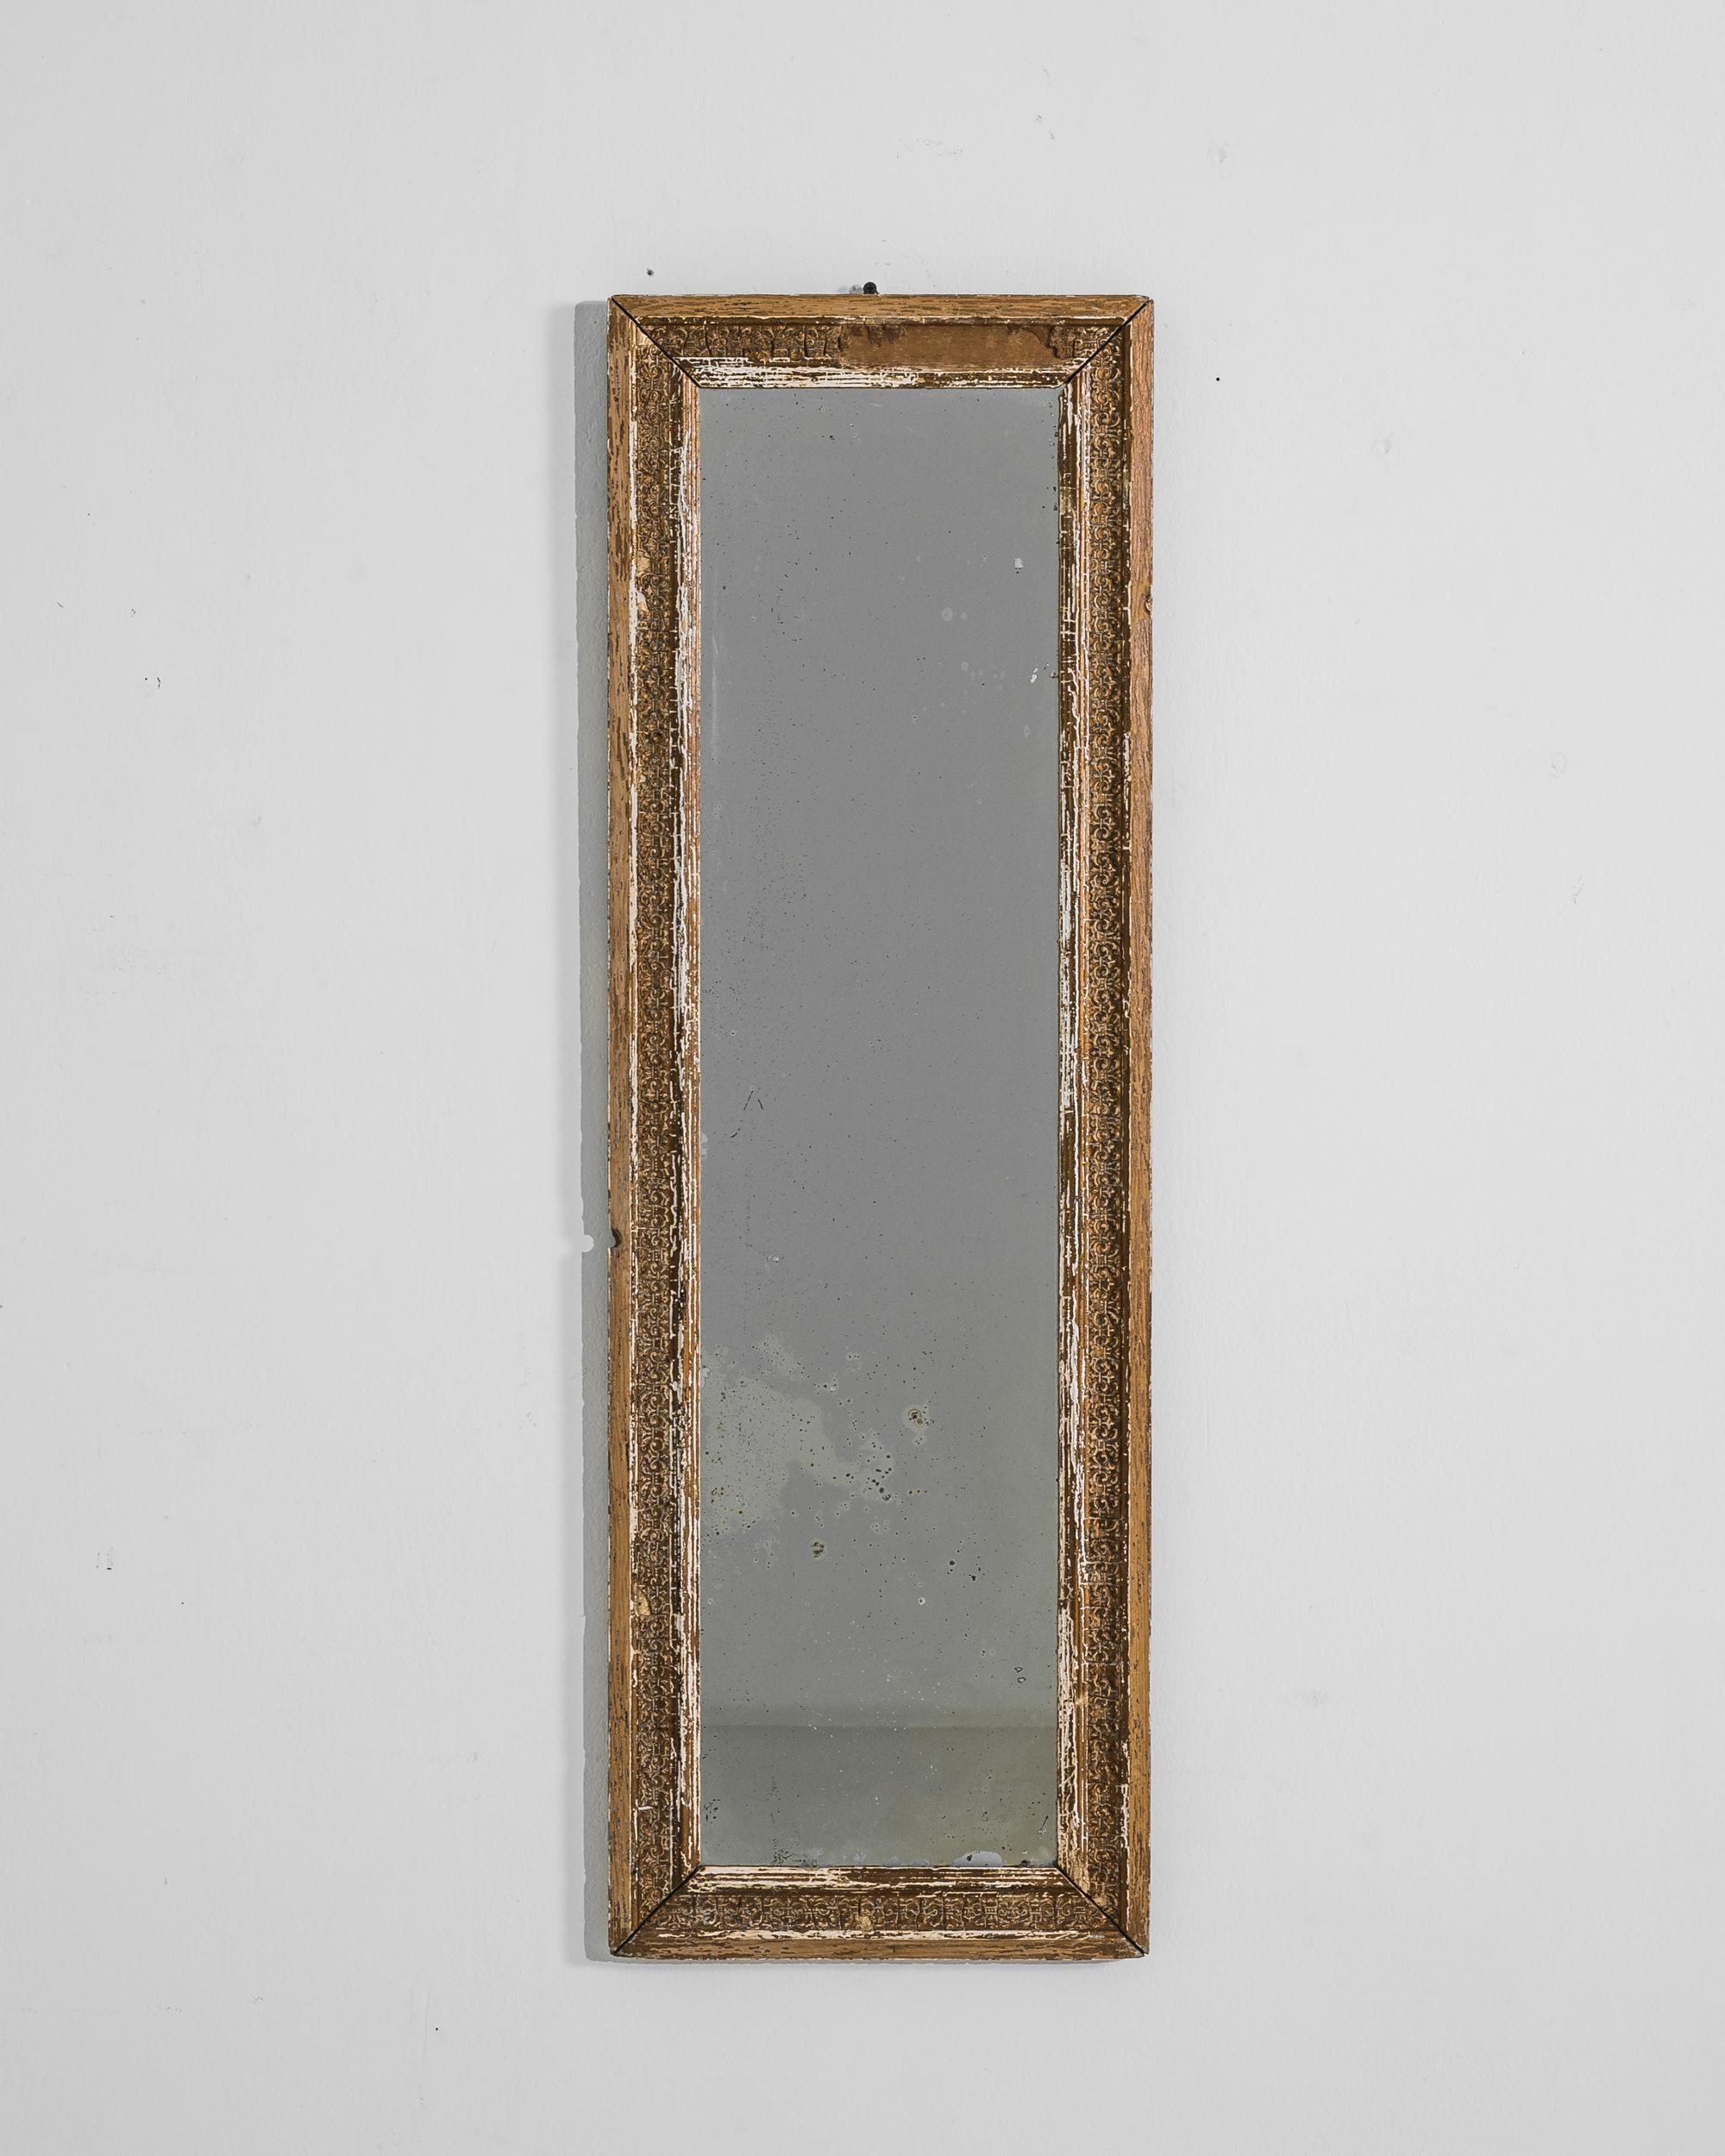 This 1900s French wooden mirror exudes an aura of vintage elegance with its distressed patina and ornate detailing. The weathered look of the frame, with its intricate carvings, tells a story of time passing—a decorative piece that not only reflects